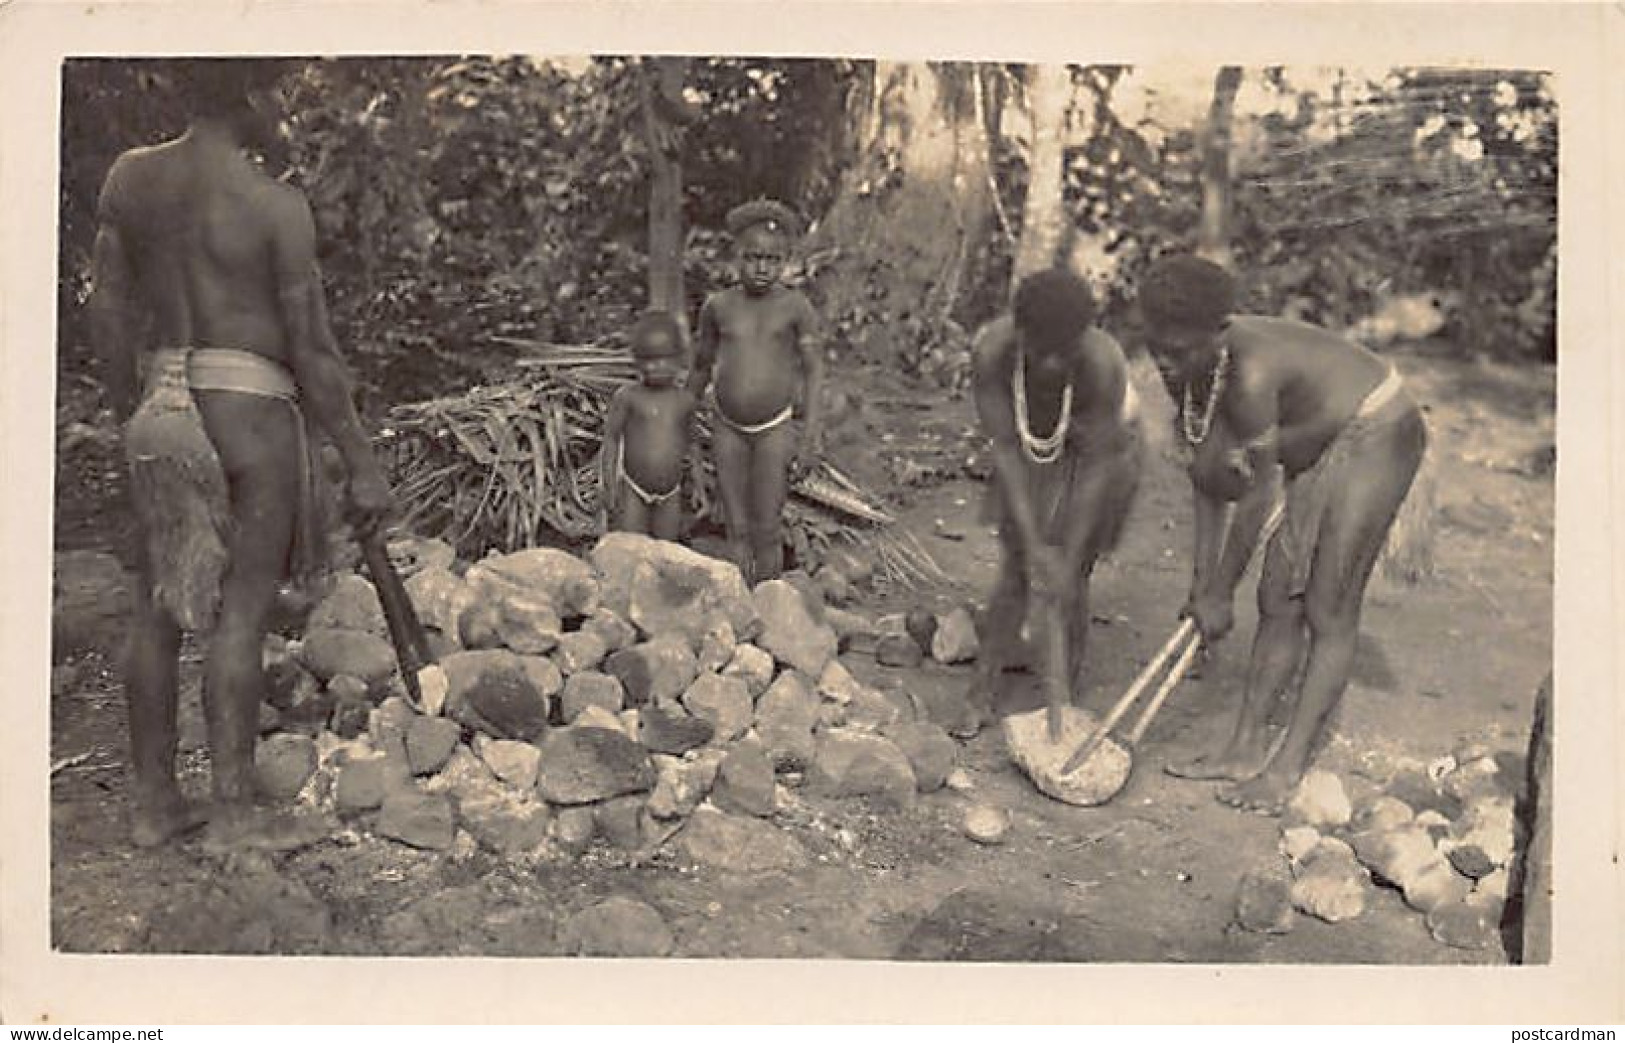 Papua New Guinea - Native Women Cooking With Hot Stones - REAL PHOTO - Publ. Unknown  - Papouasie-Nouvelle-Guinée